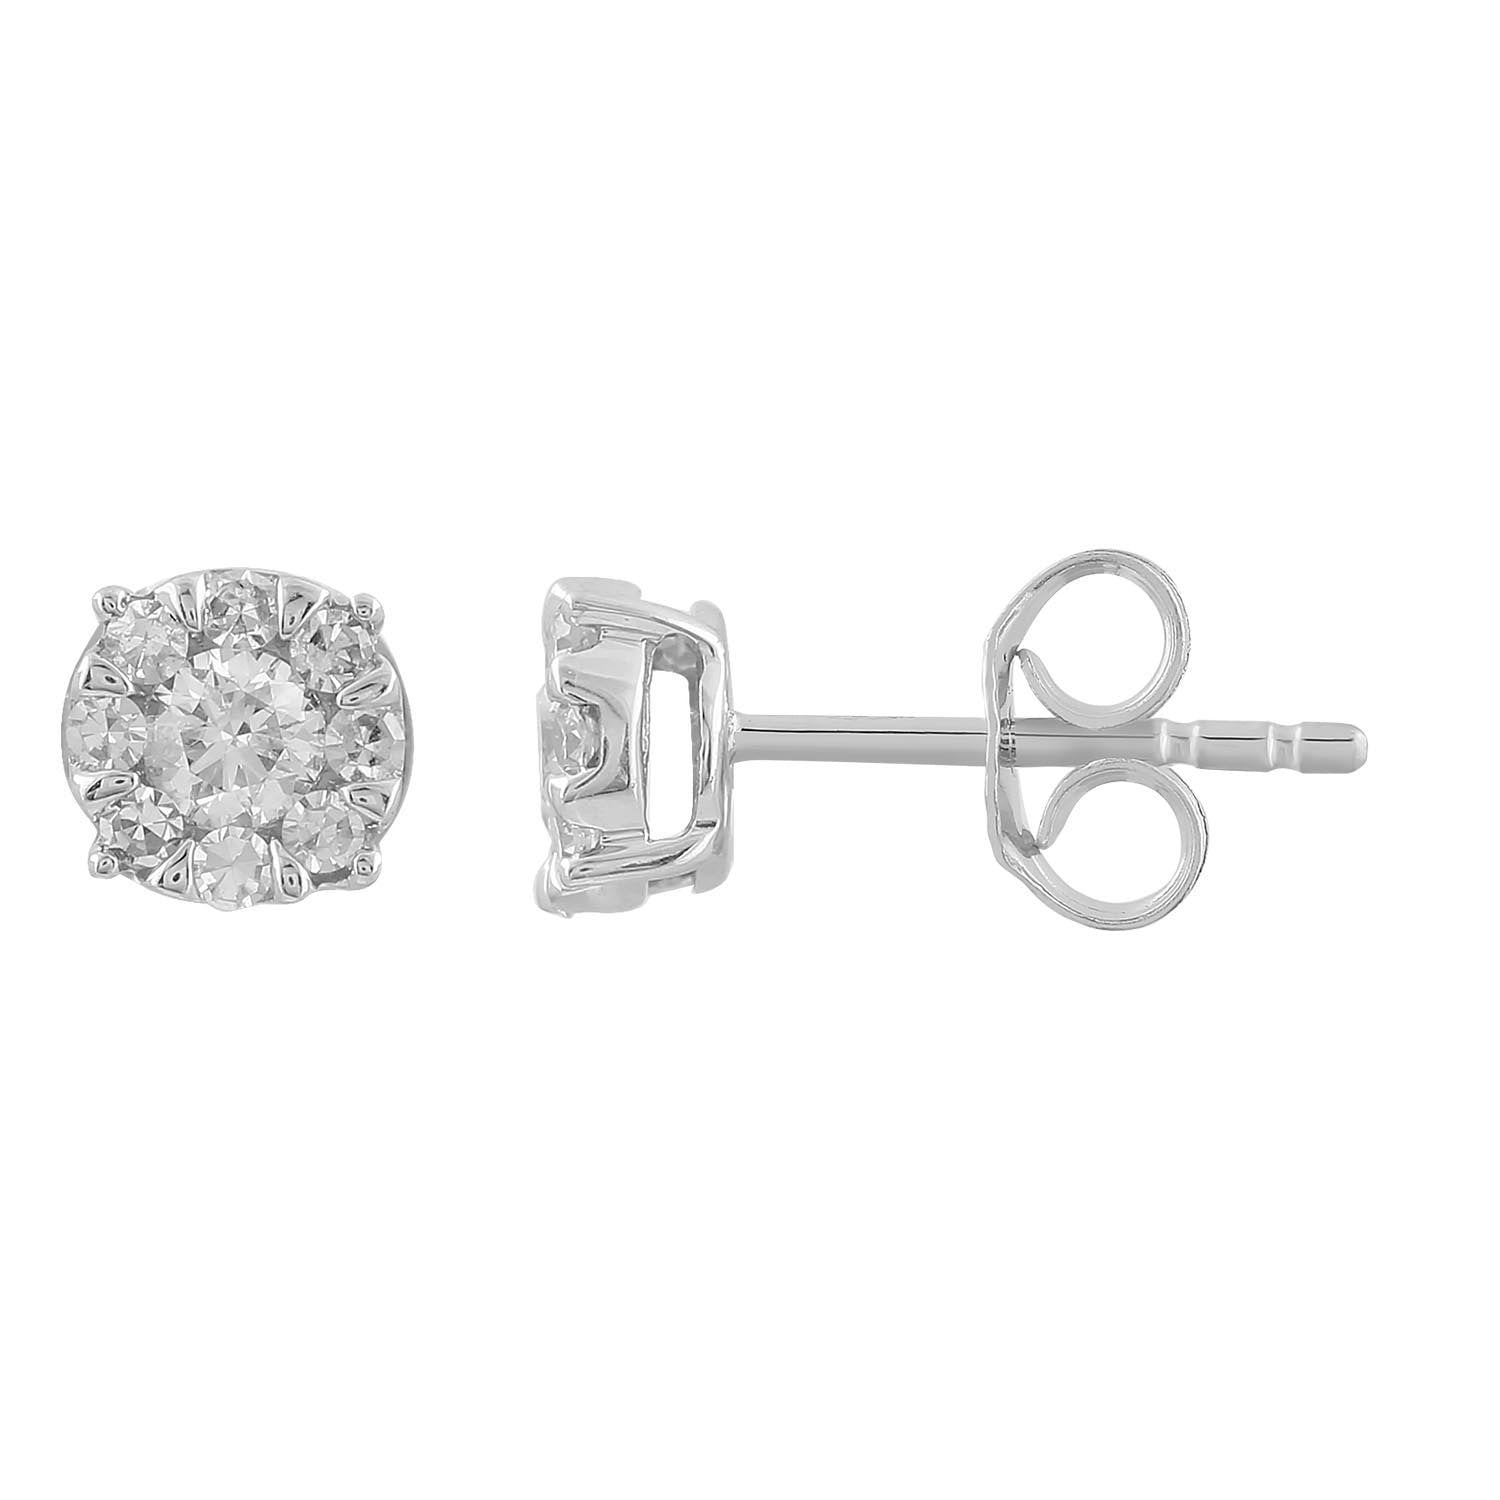 Stud Earrings with 0.25ct Diamonds in 9K White Gold